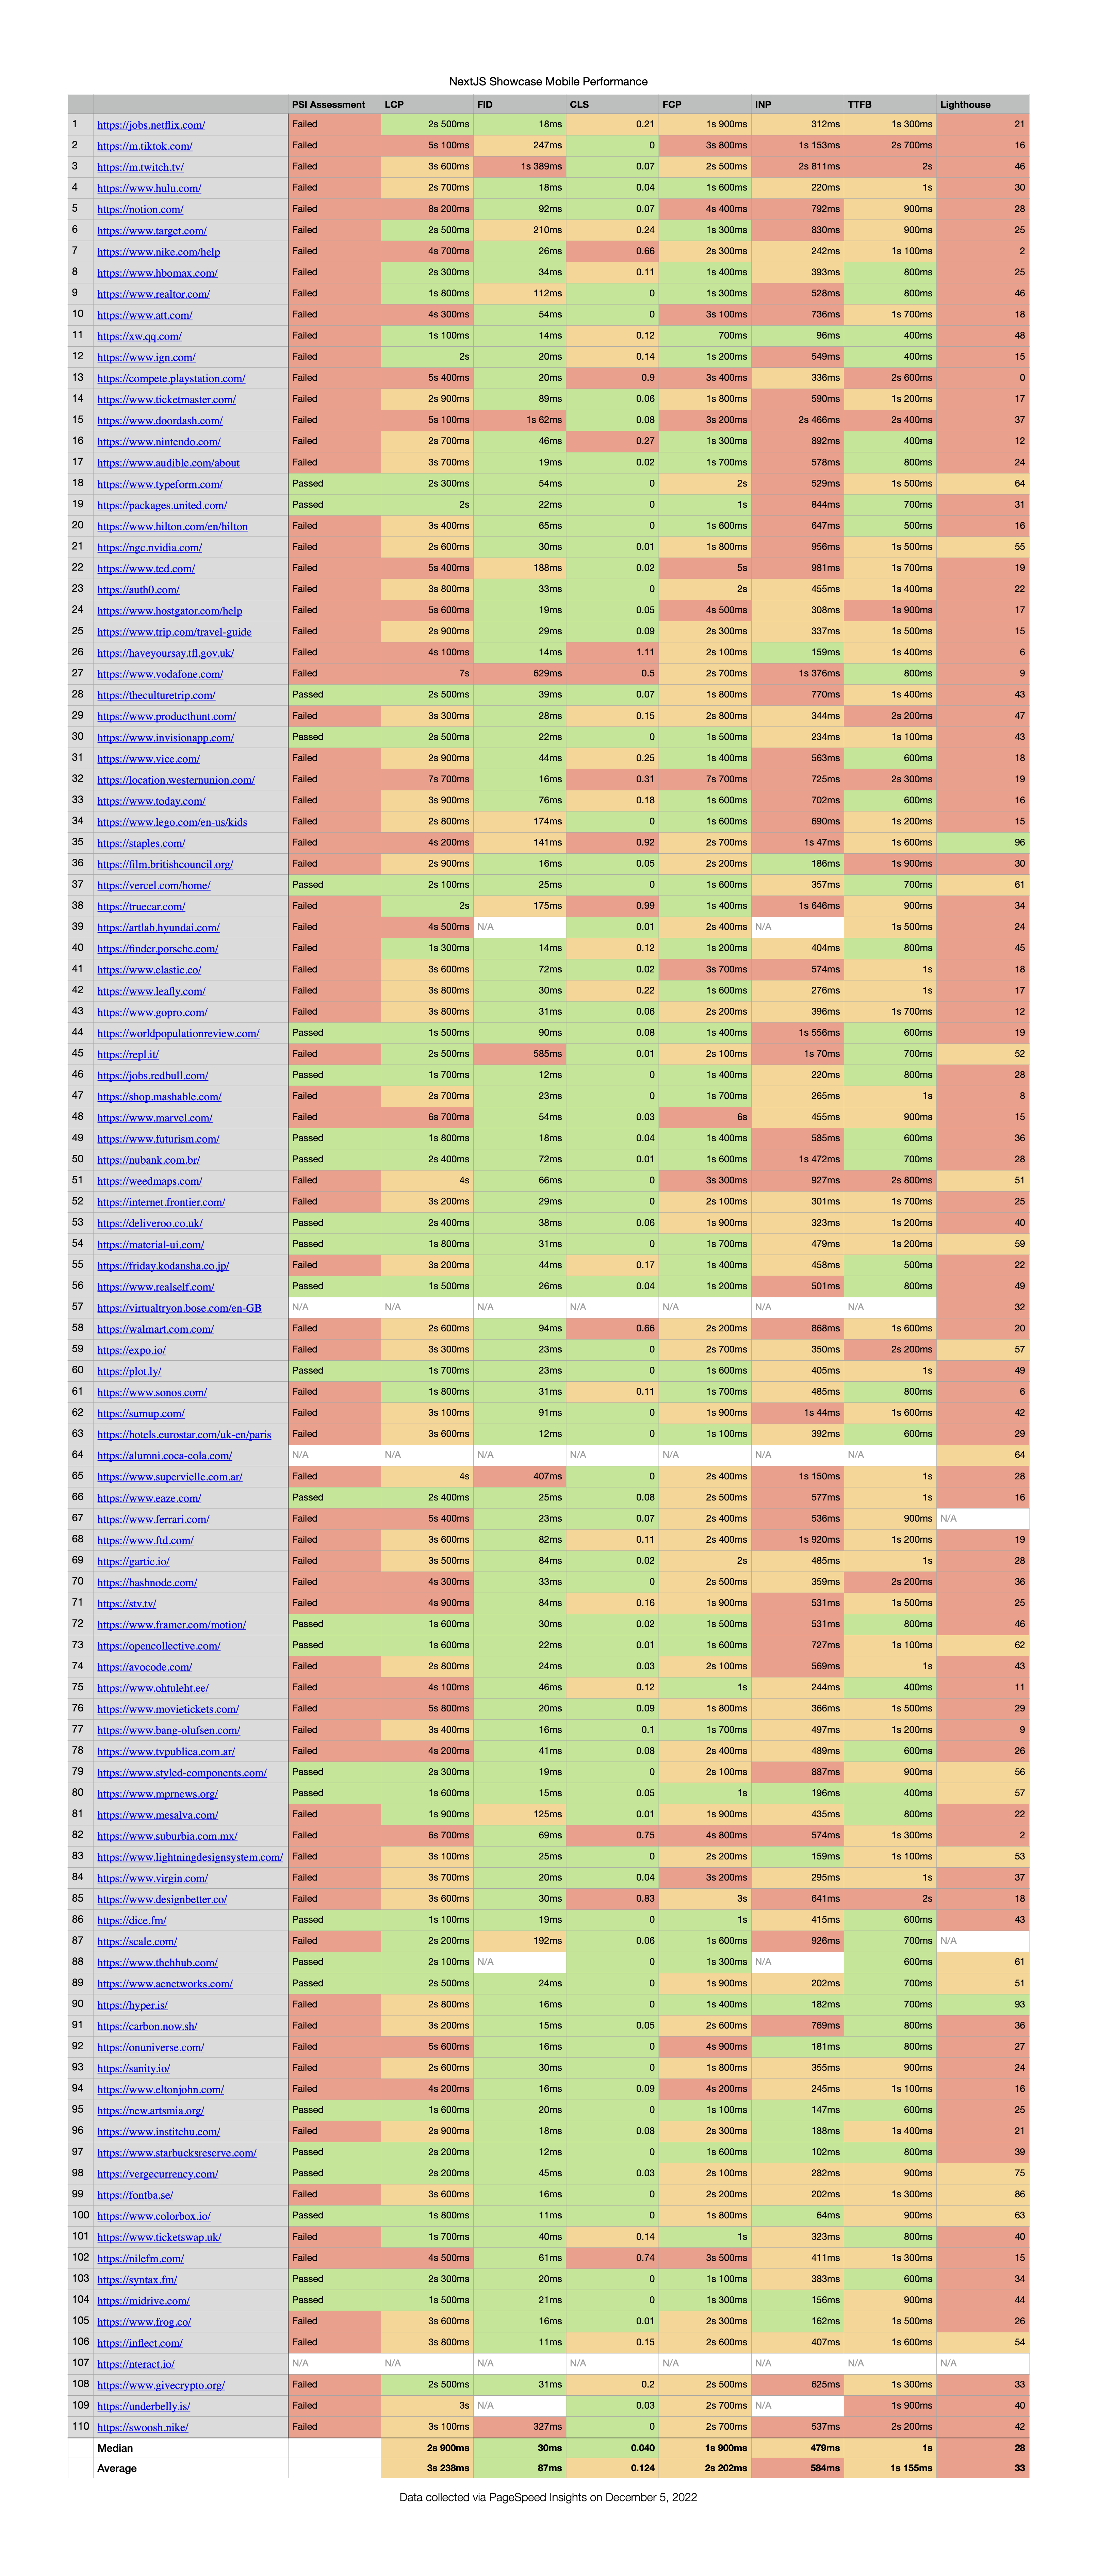 Image of a 110 row spreadsheet of the mobile web vitals scores of sites built with the Next.js framework. Spreadsheet available at https://github.com/ClarkMitchell/next-mobile-perf